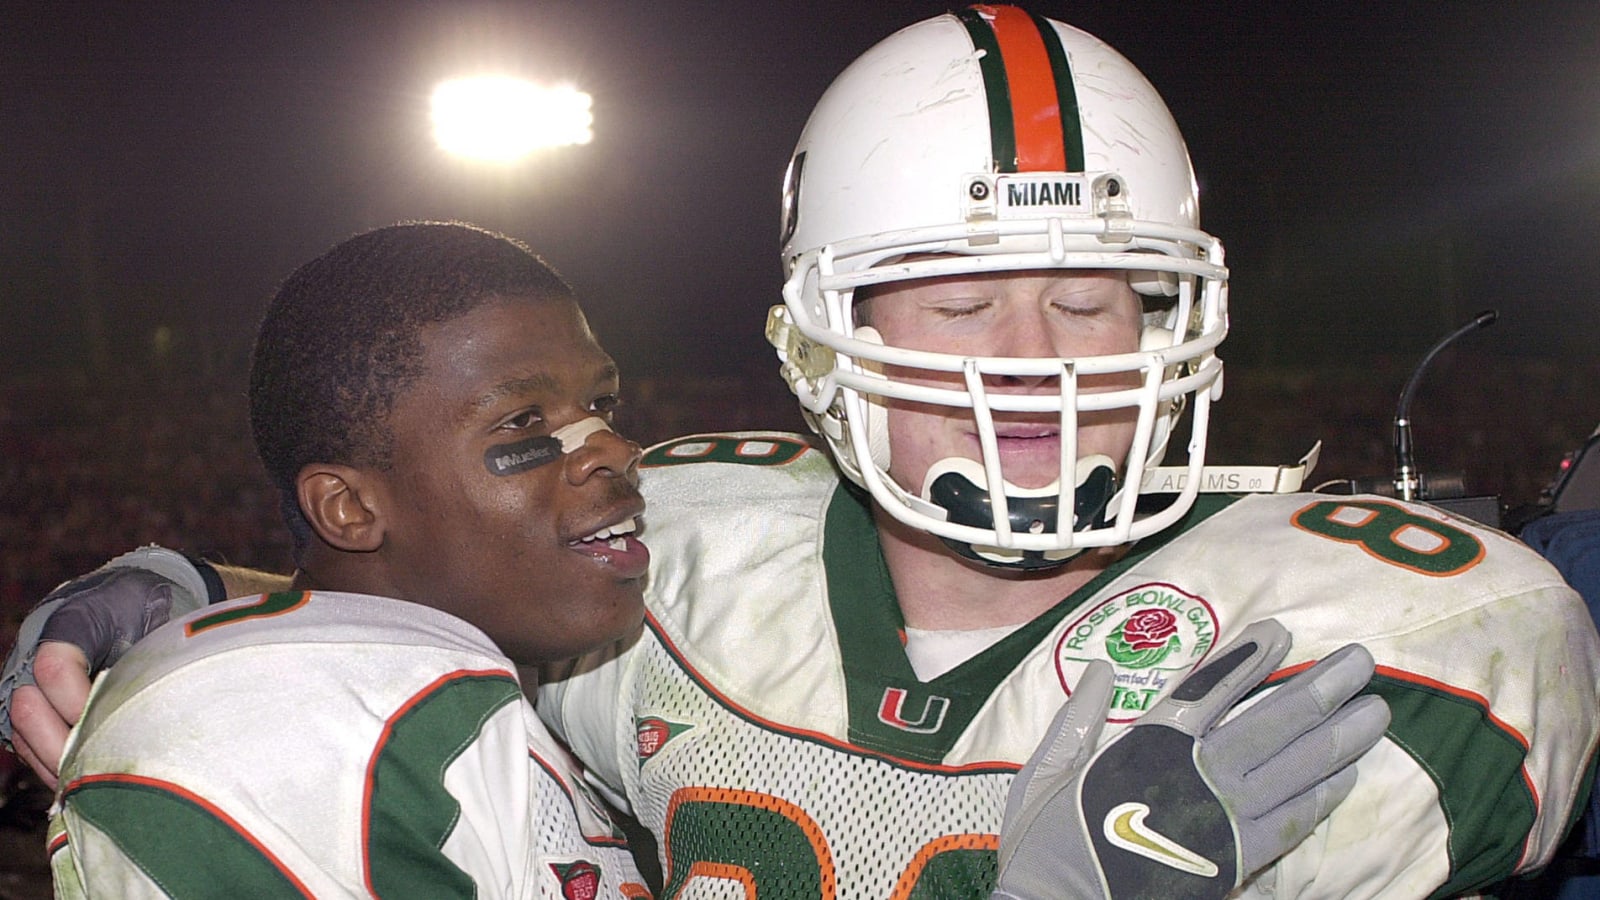 The 'Miami Hurricane first rounders' quiz